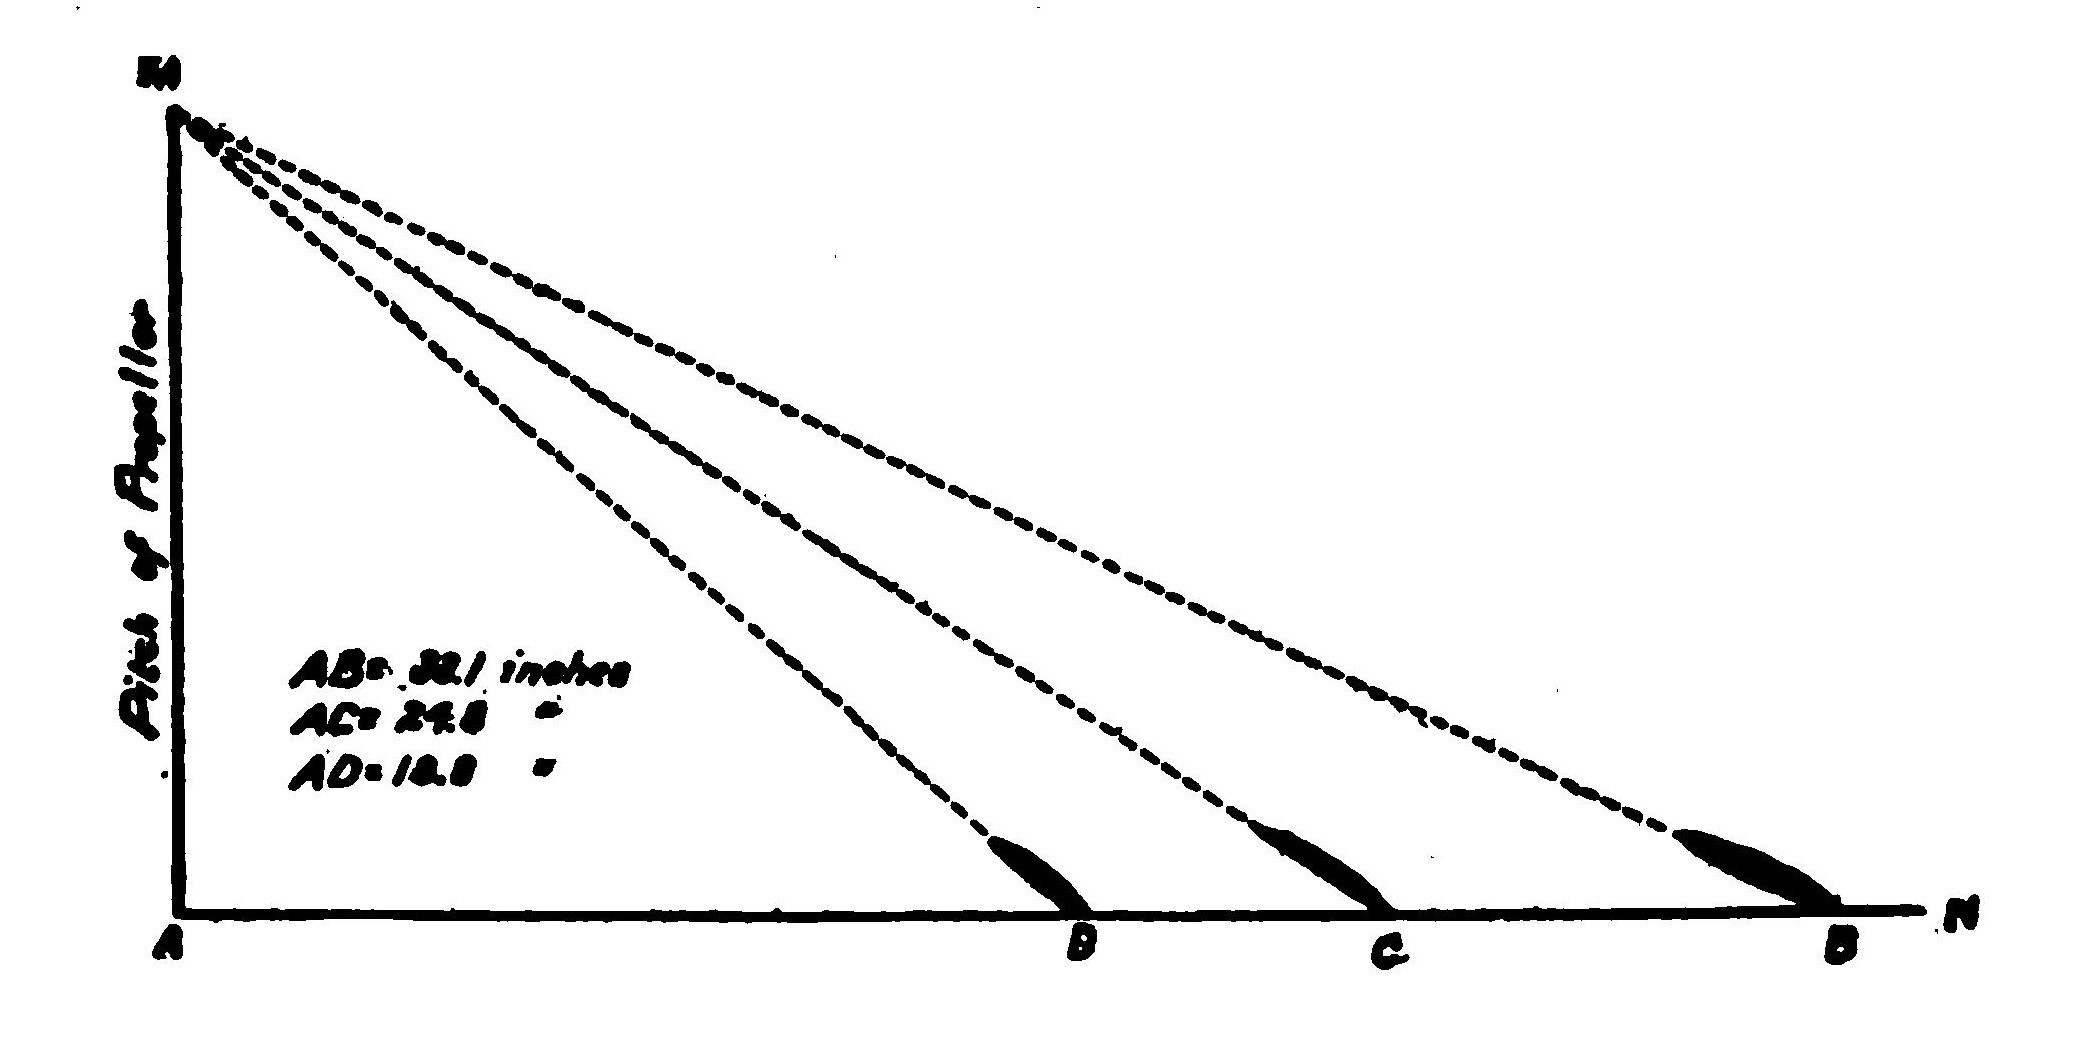 FIG. 26. Method of laying out a screw propeller, that is, determining the angle of the blades at different points.